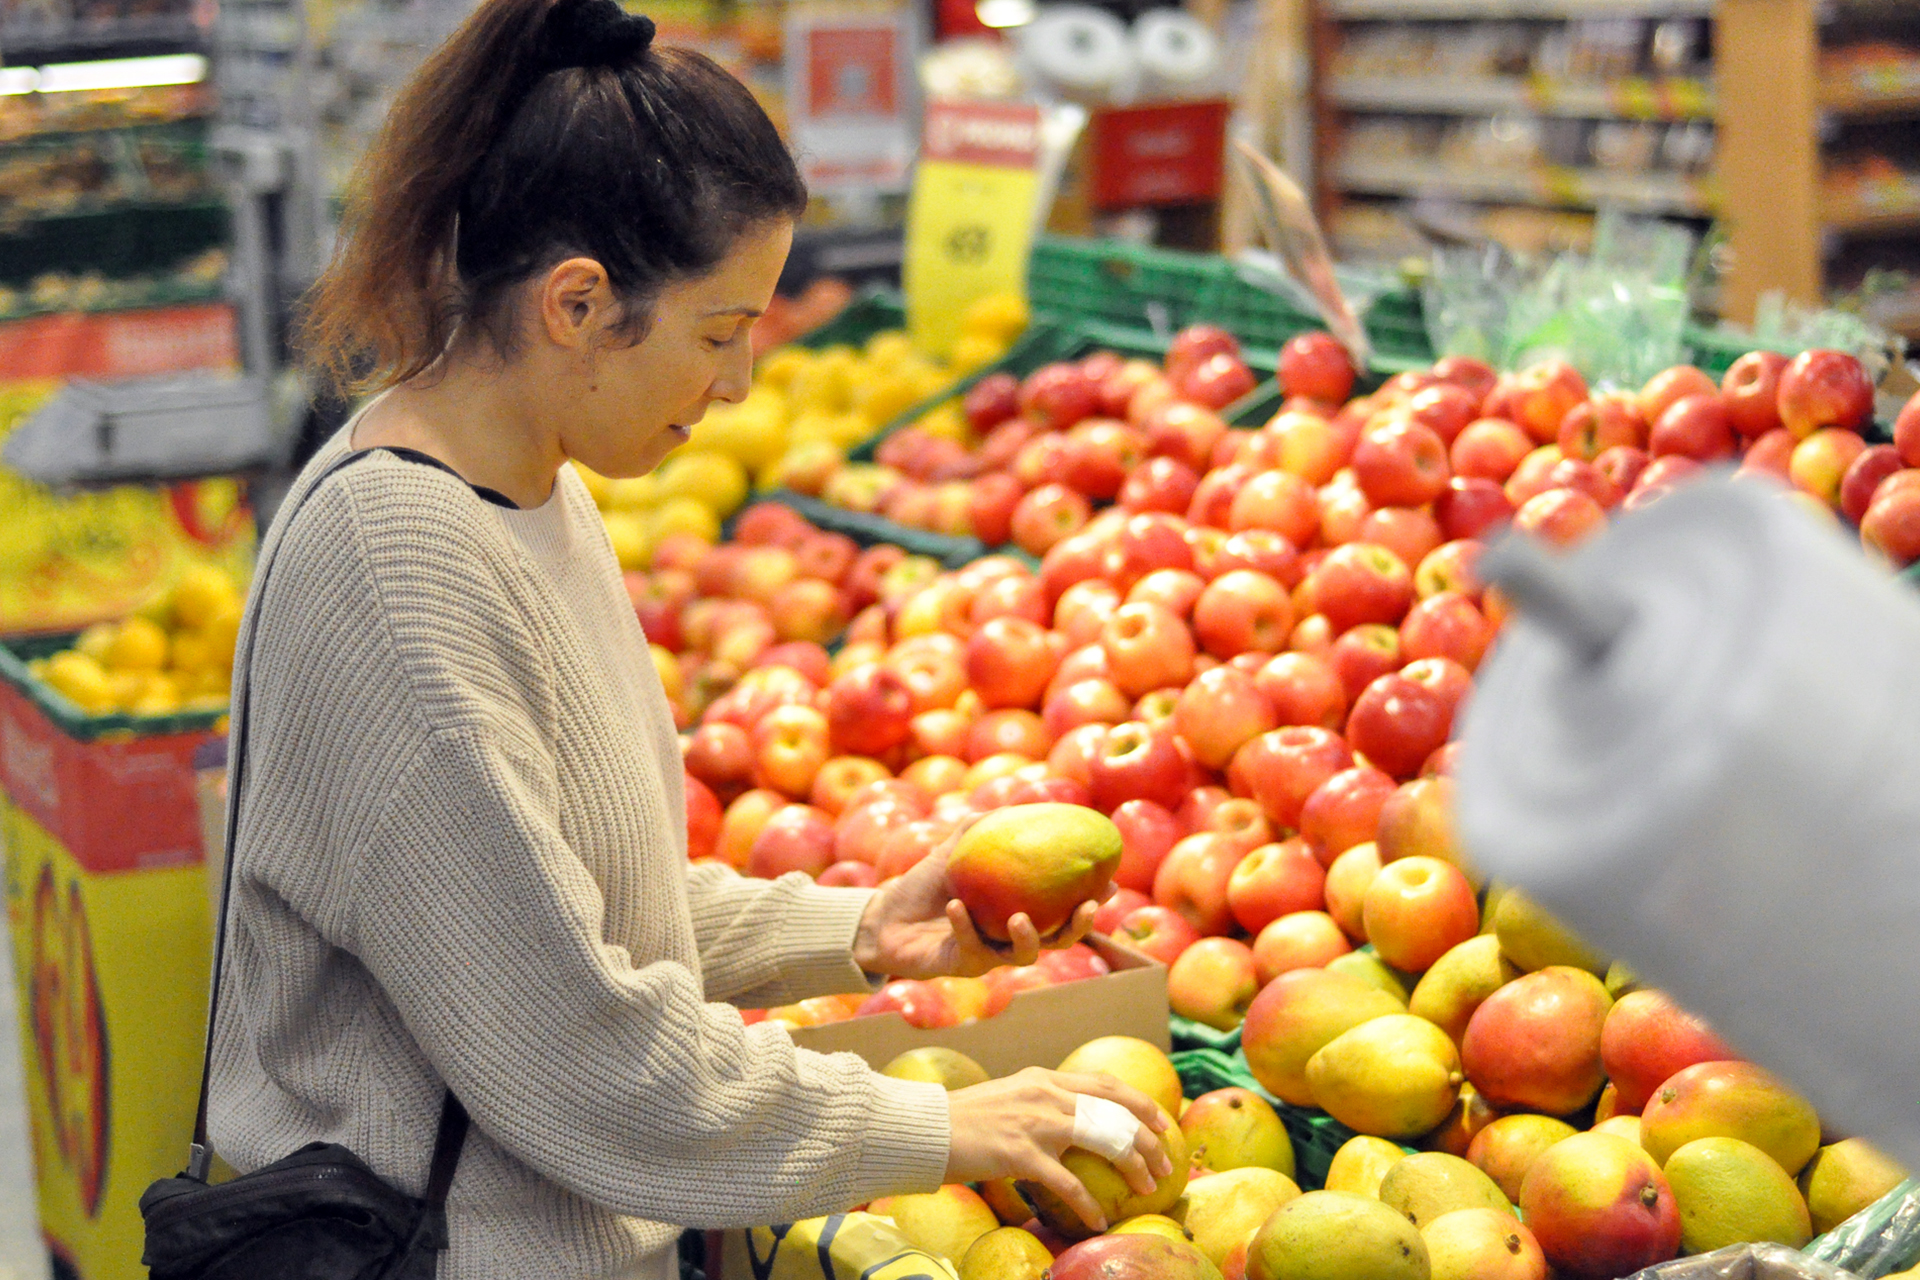 A woman shopping for produce